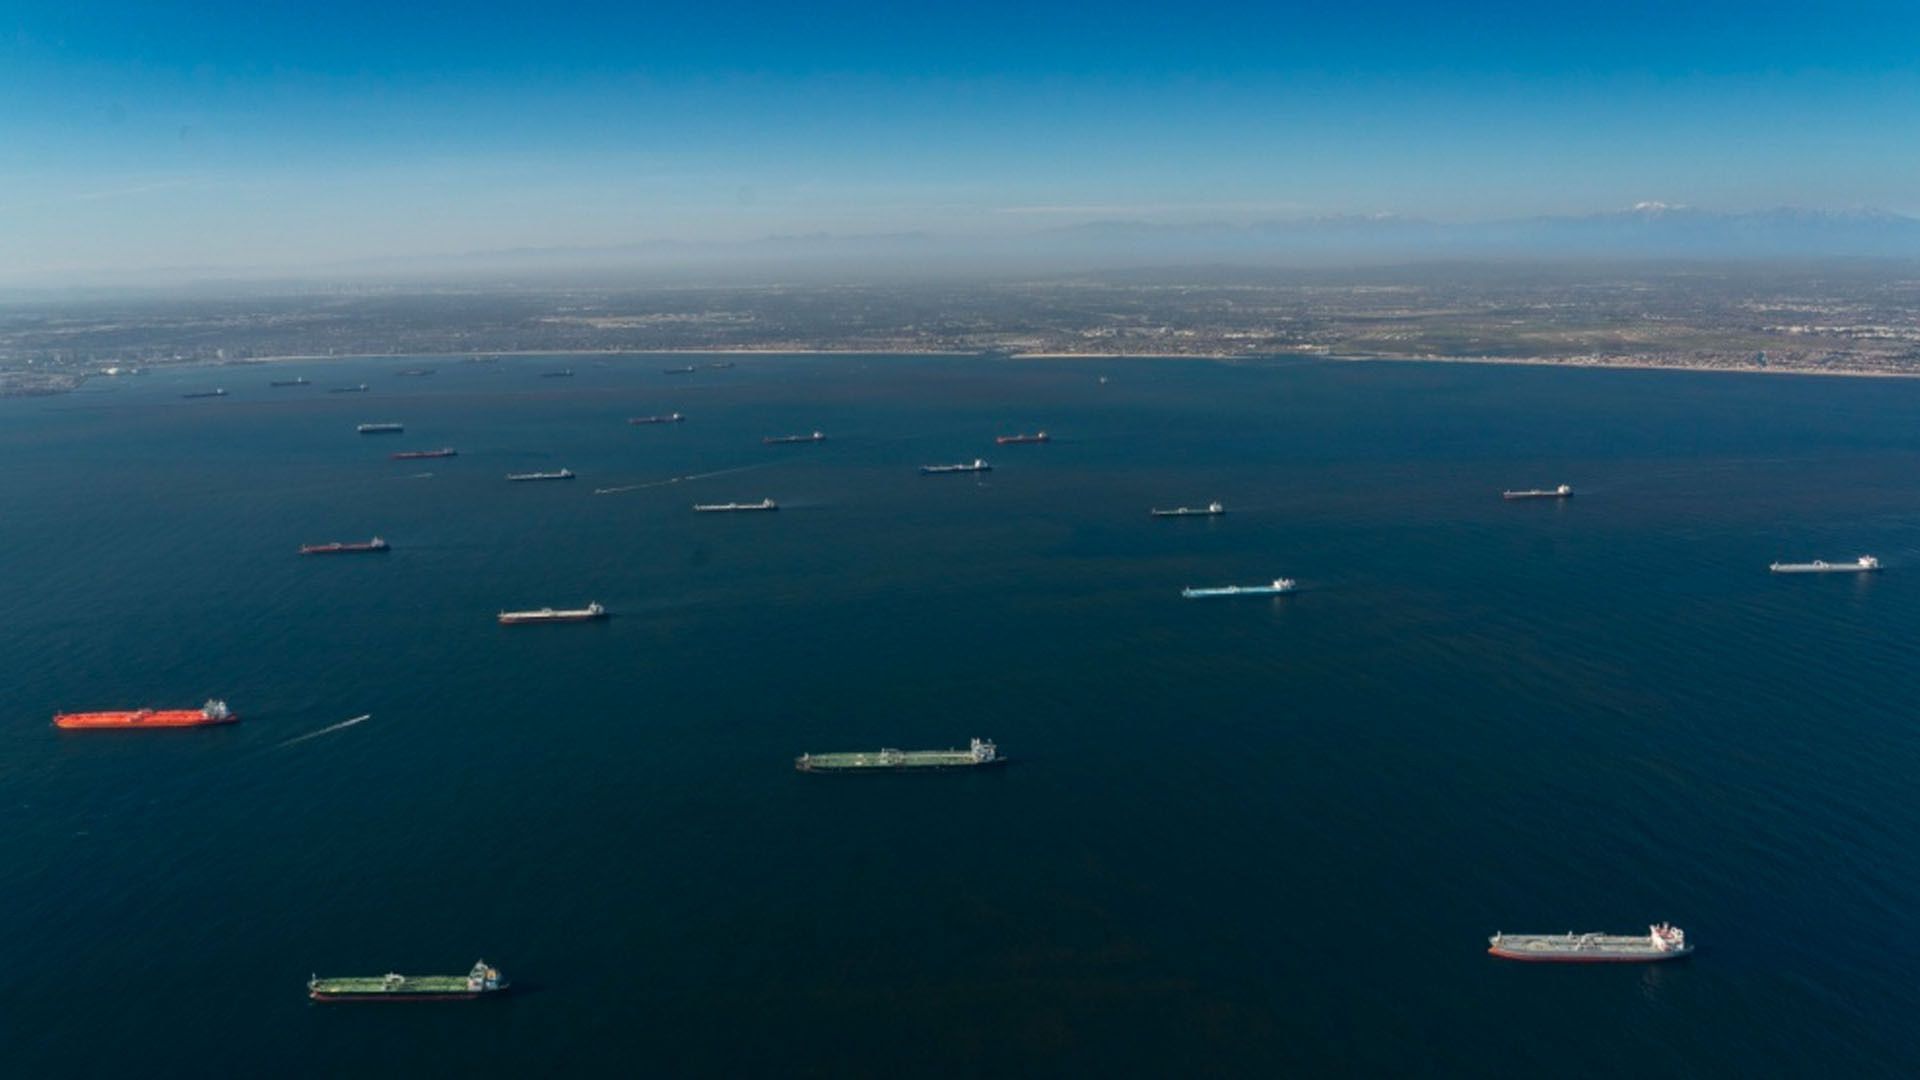 Oil tankers parked in the ocean.